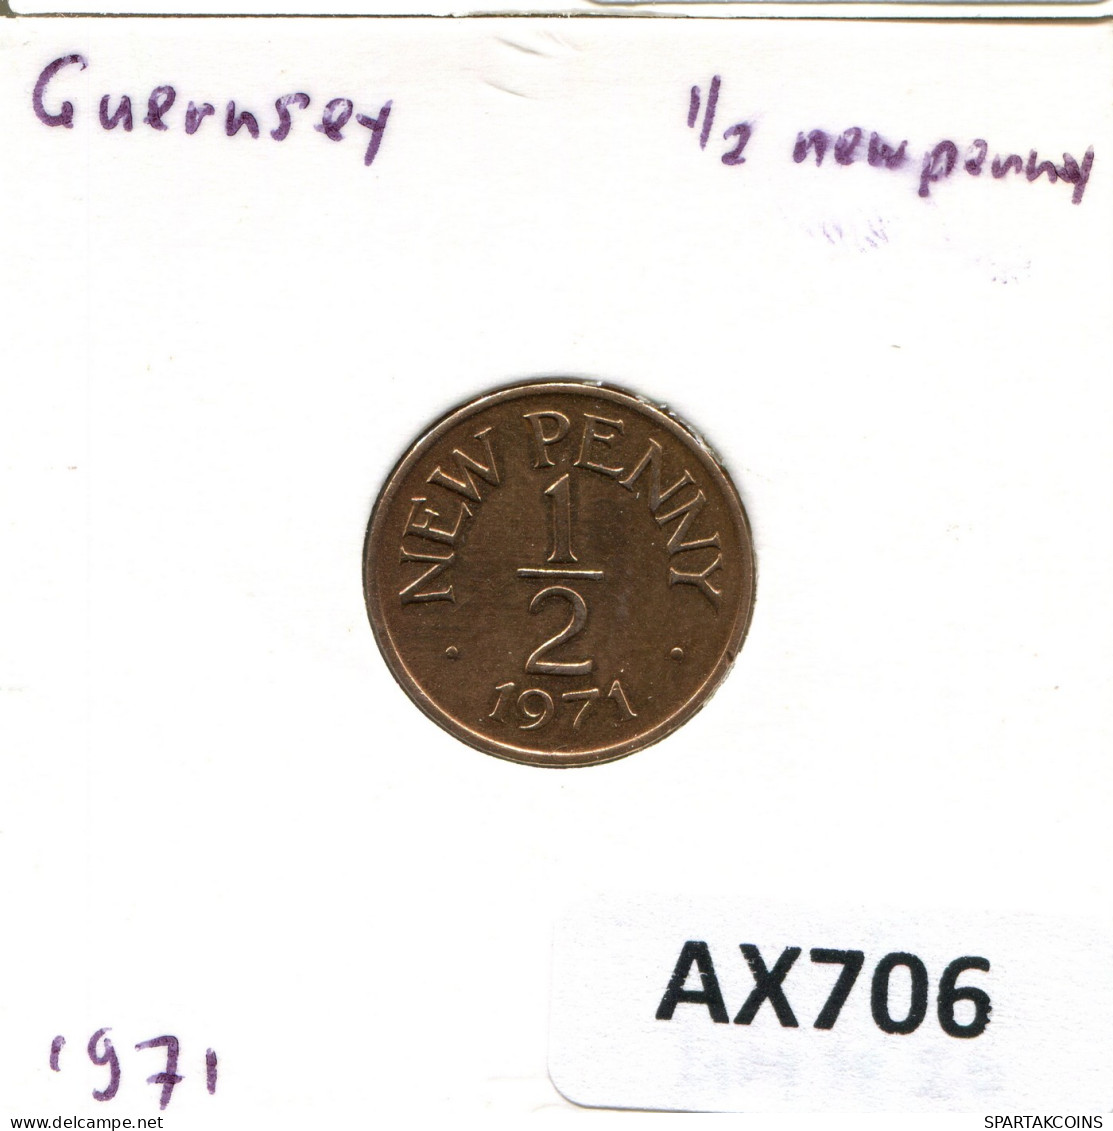 1/2 NEW PENNY 1971 GUERNSEY Coin #AX706.U - Guernesey